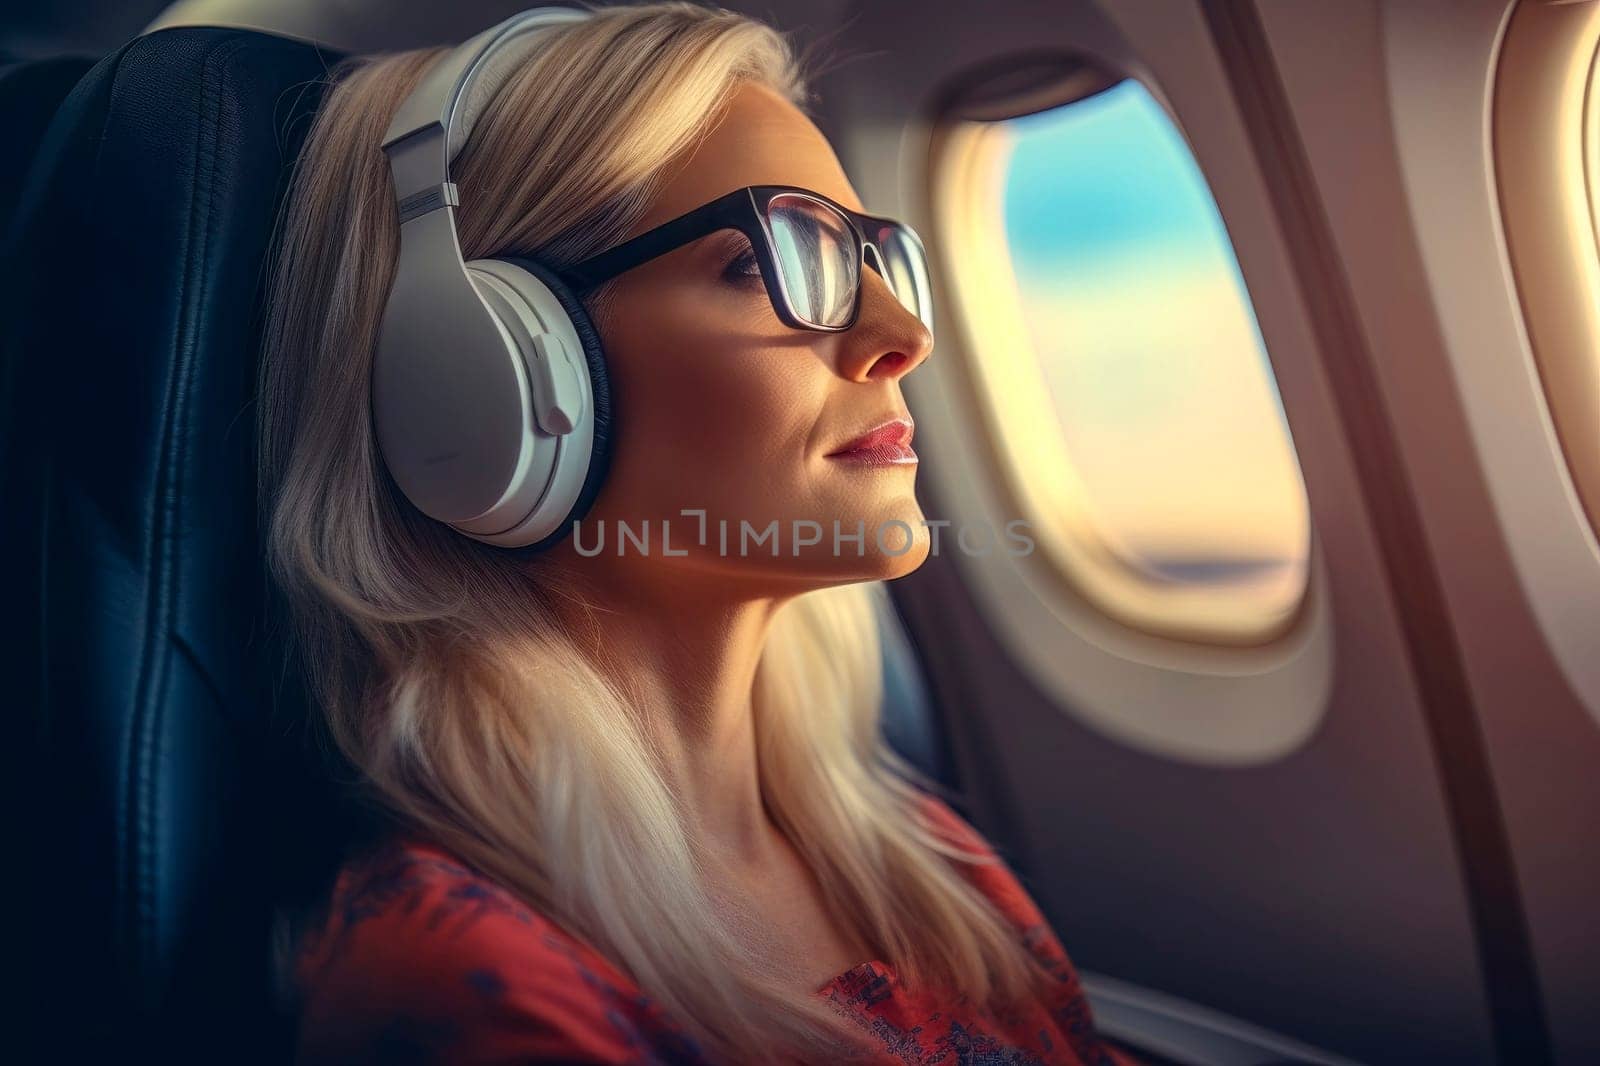 Capture the tranquility of travel and music with this image of a relaxed girl enjoying her journey on an airplane.